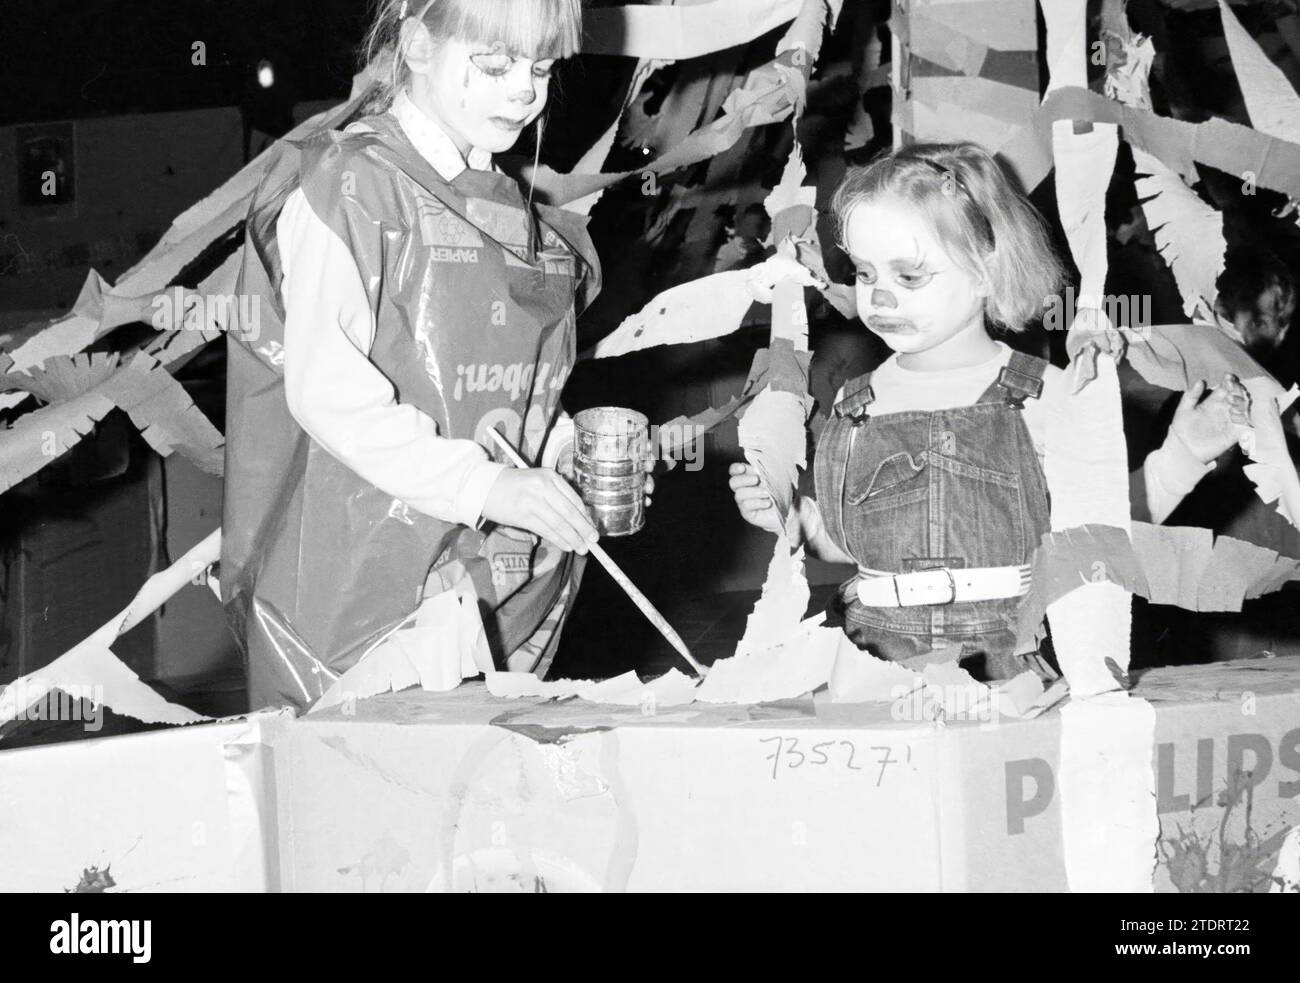 Children with circus party in Witte Theater., Circus, Children, kid, children's homes, children's party, children's, 09-04-1985, Whizgle News from the Past, Tailored for the Future. Explore historical narratives, Dutch The Netherlands agency image with a modern perspective, bridging the gap between yesterday's events and tomorrow's insights. A timeless journey shaping the stories that shape our future Stock Photo